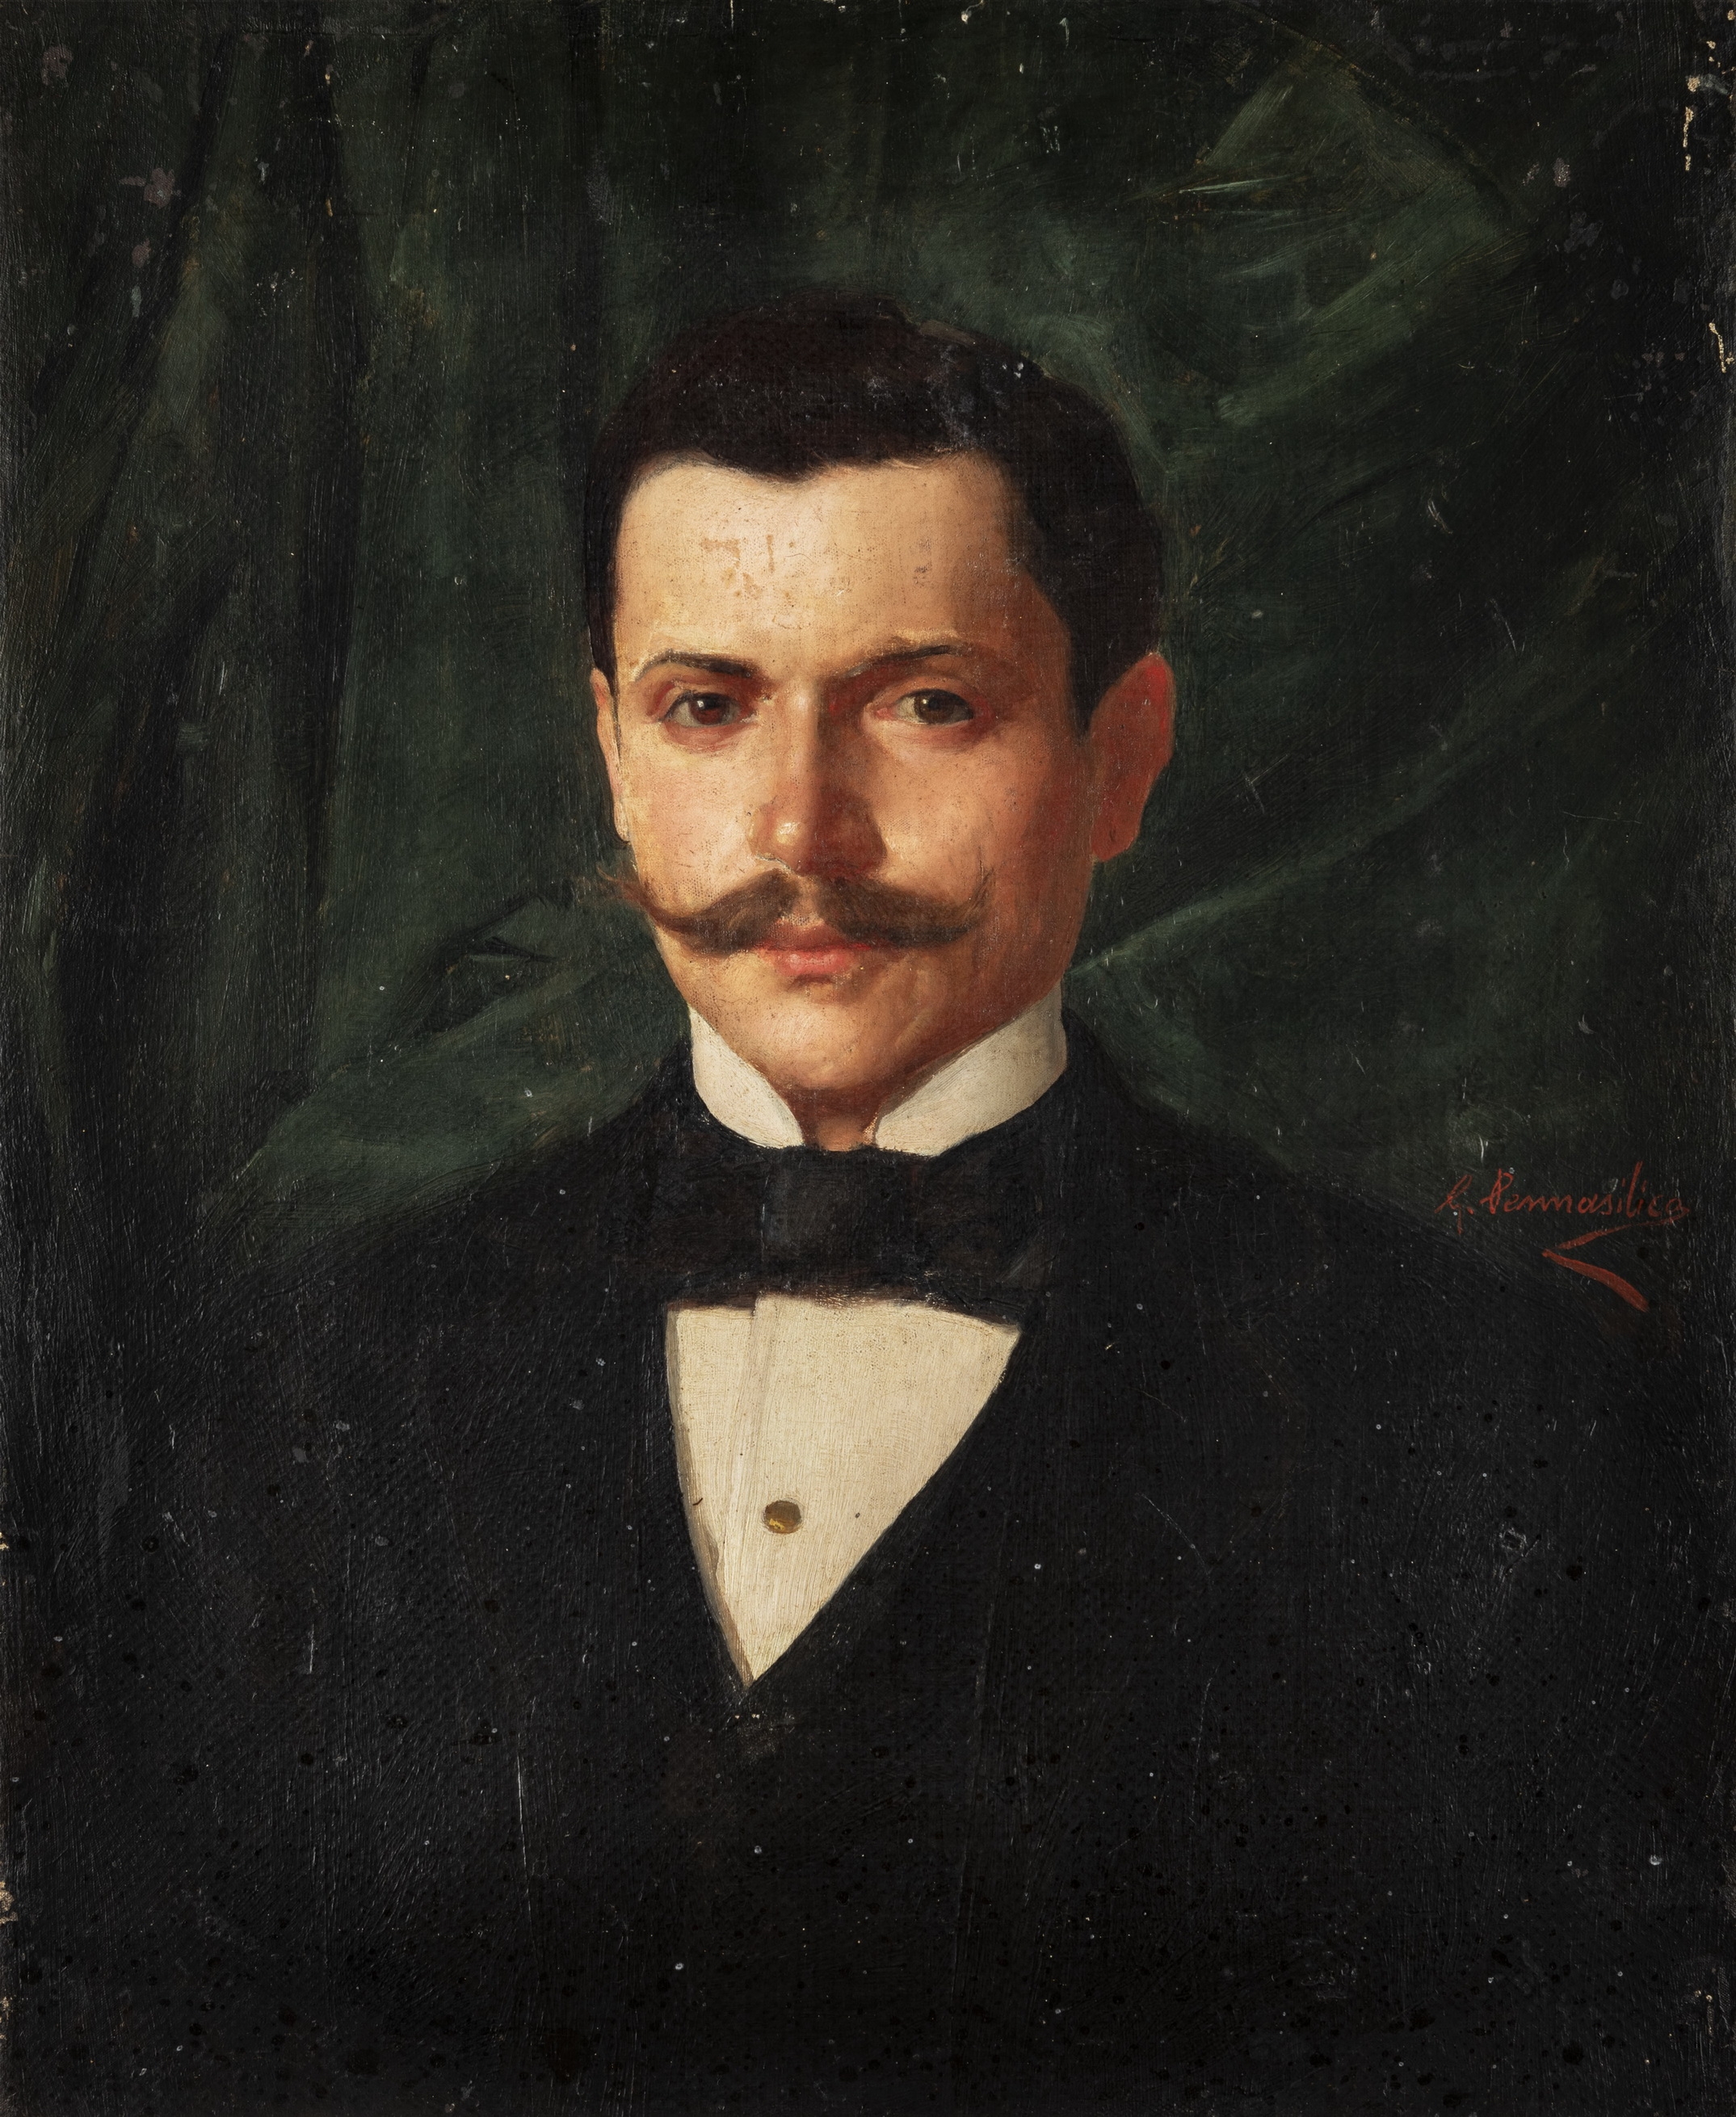 Portrait of young man with mustache by Giuseppe Pennasilico